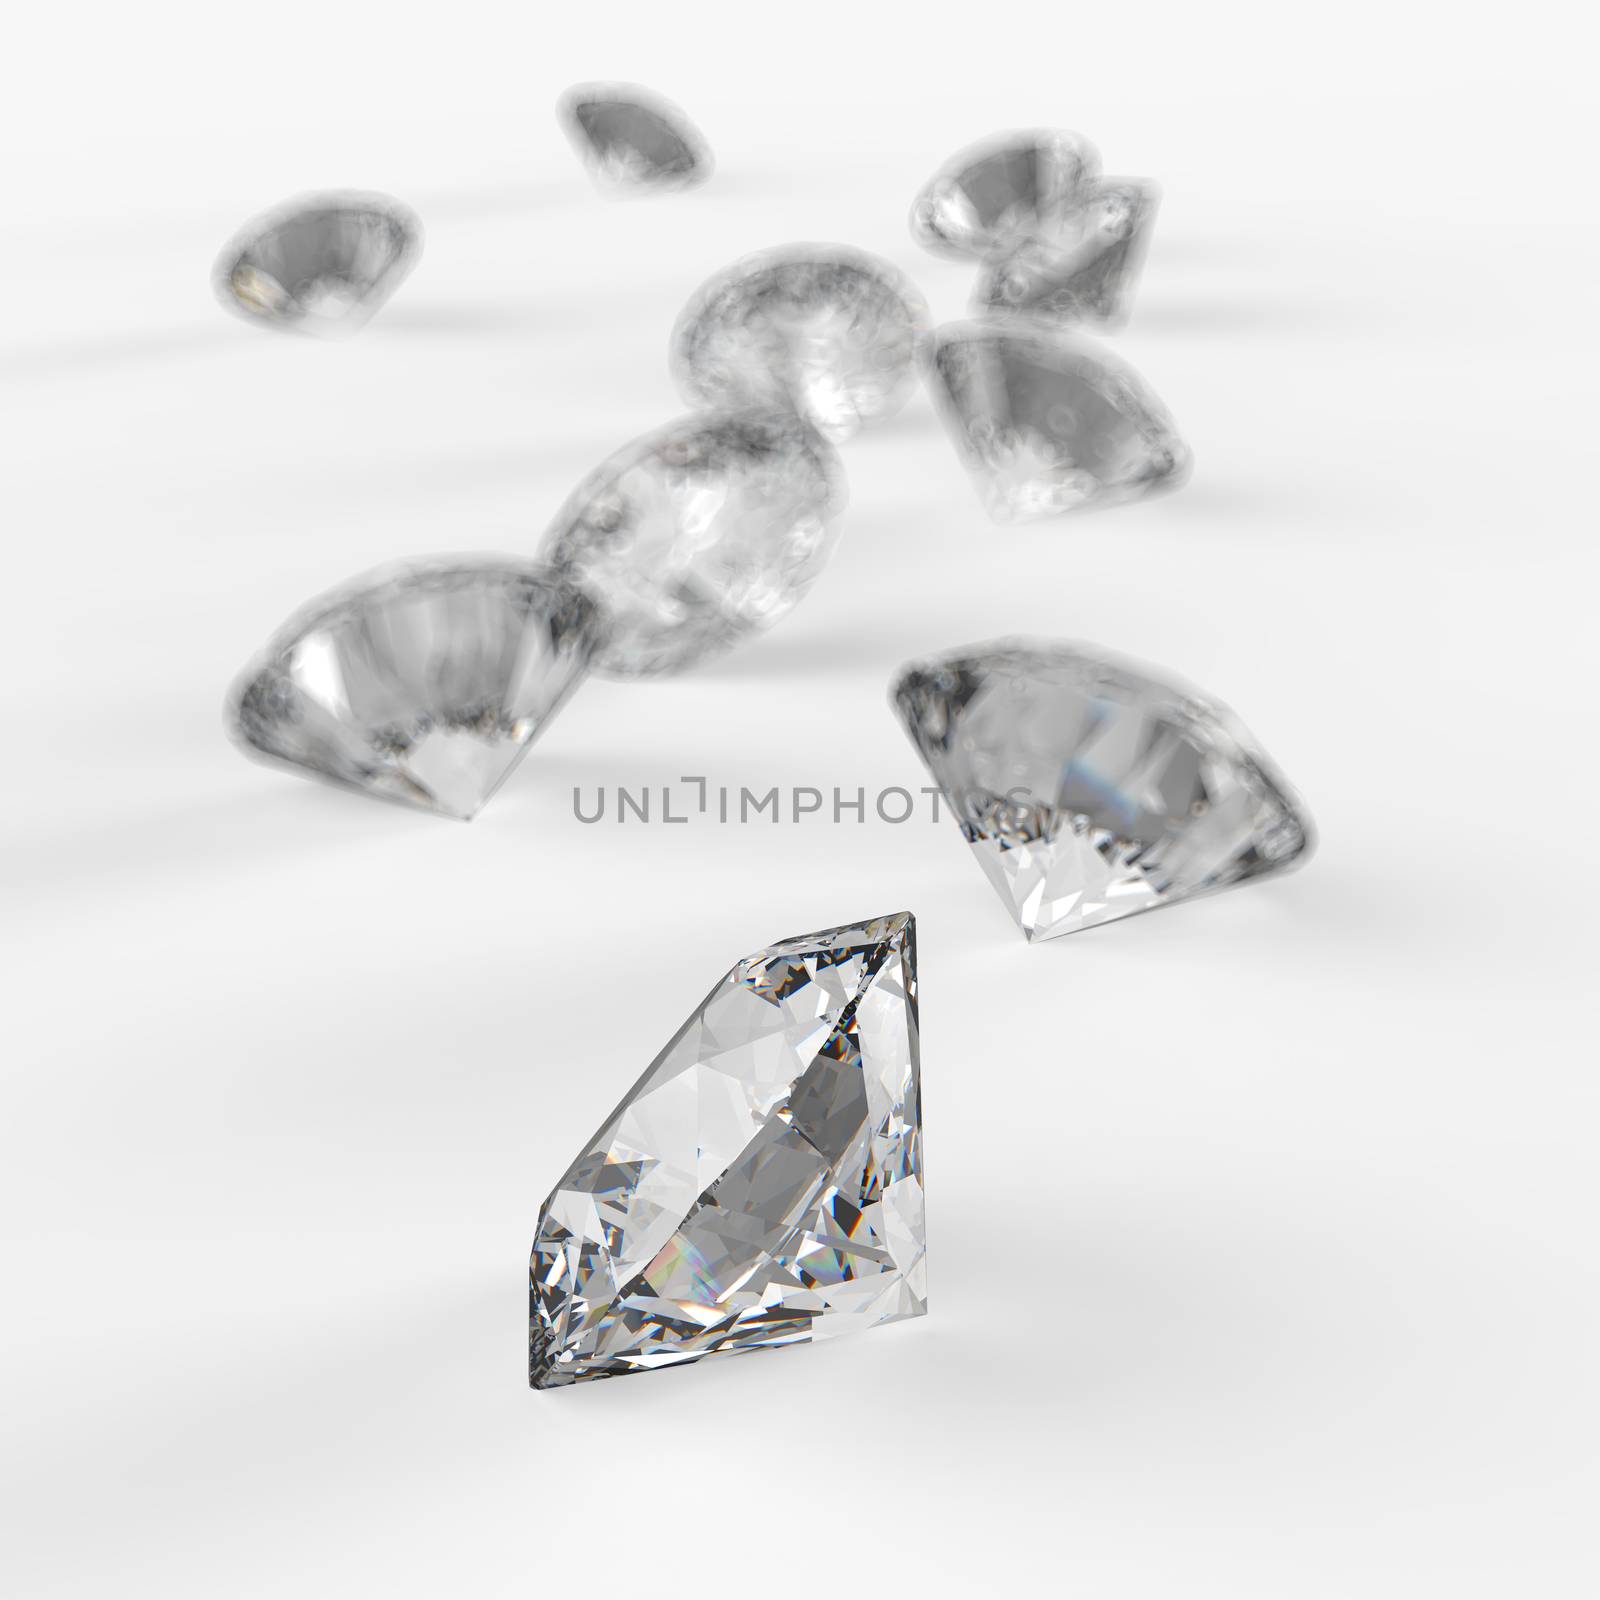 Diamonds 3d in composition as concept by everythingpossible